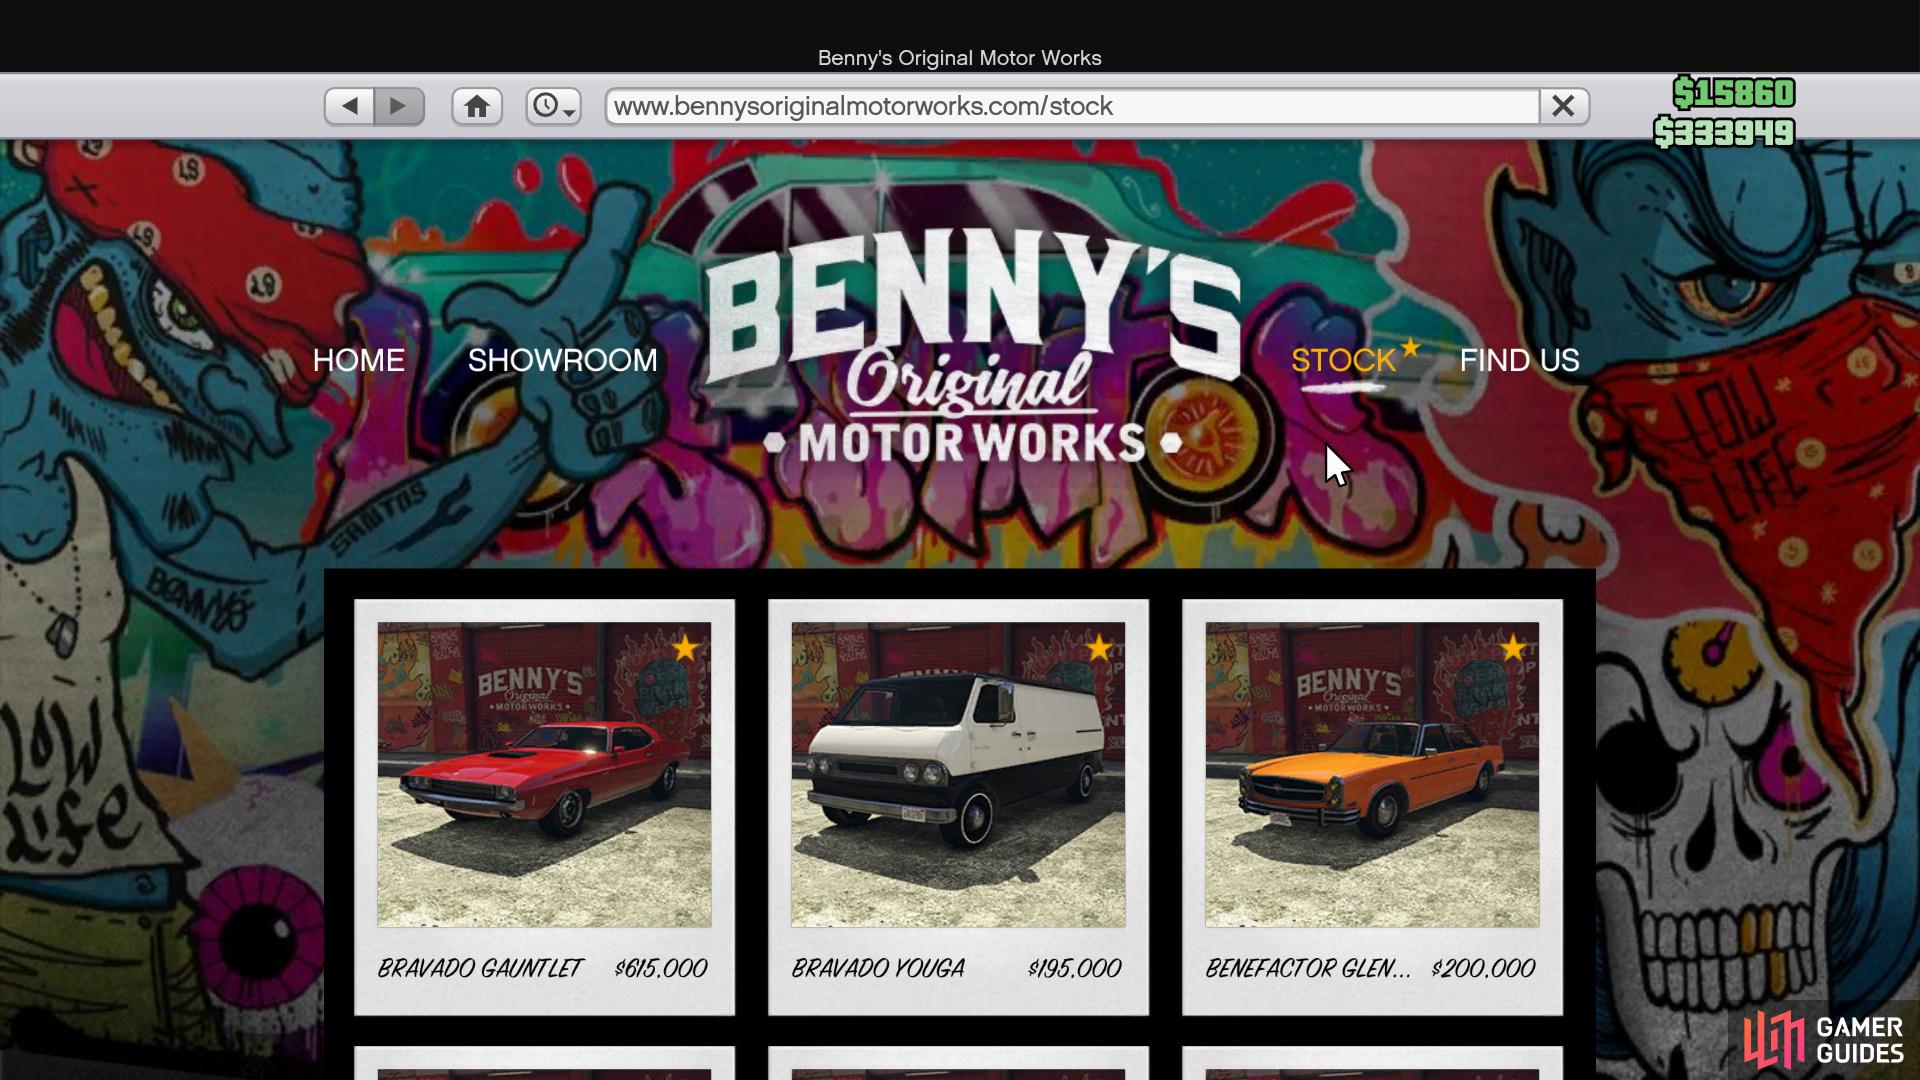 You can see the list of Benny’s Vehicles via the website.